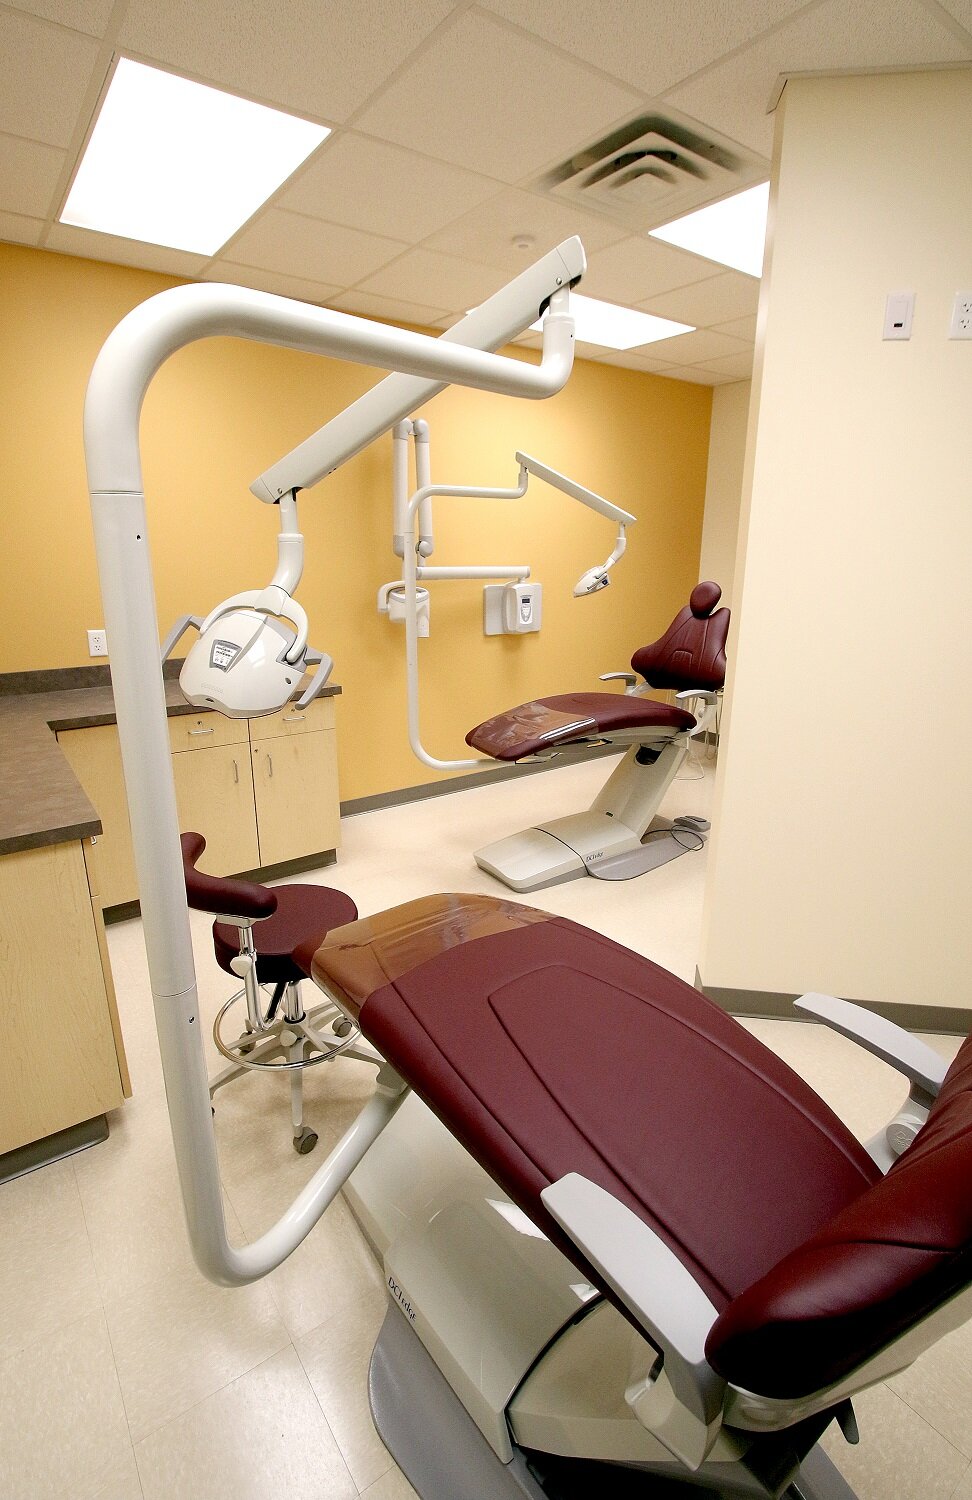 JS1_0042 CHN Clinic Dental Patient Room with two patient chairs.JPG